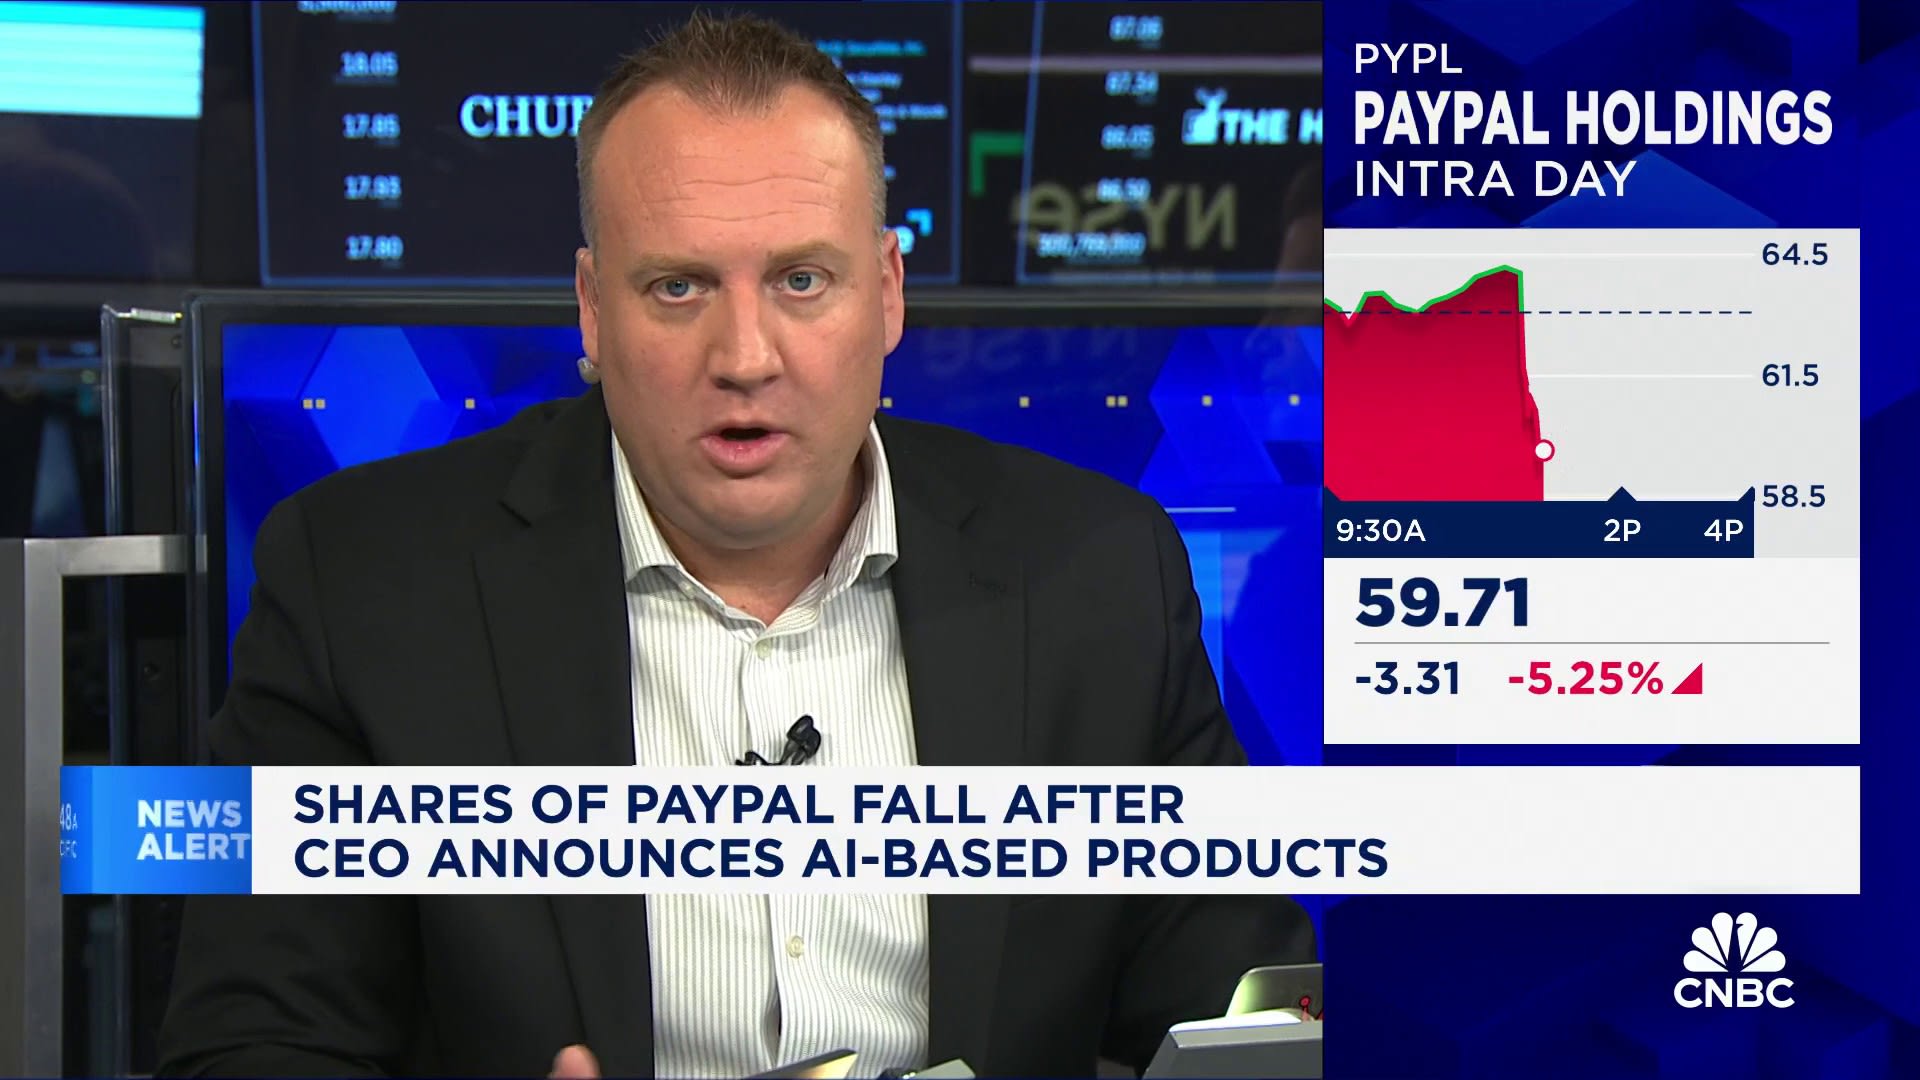 PayPal shares fall after CEO announces AI-based products